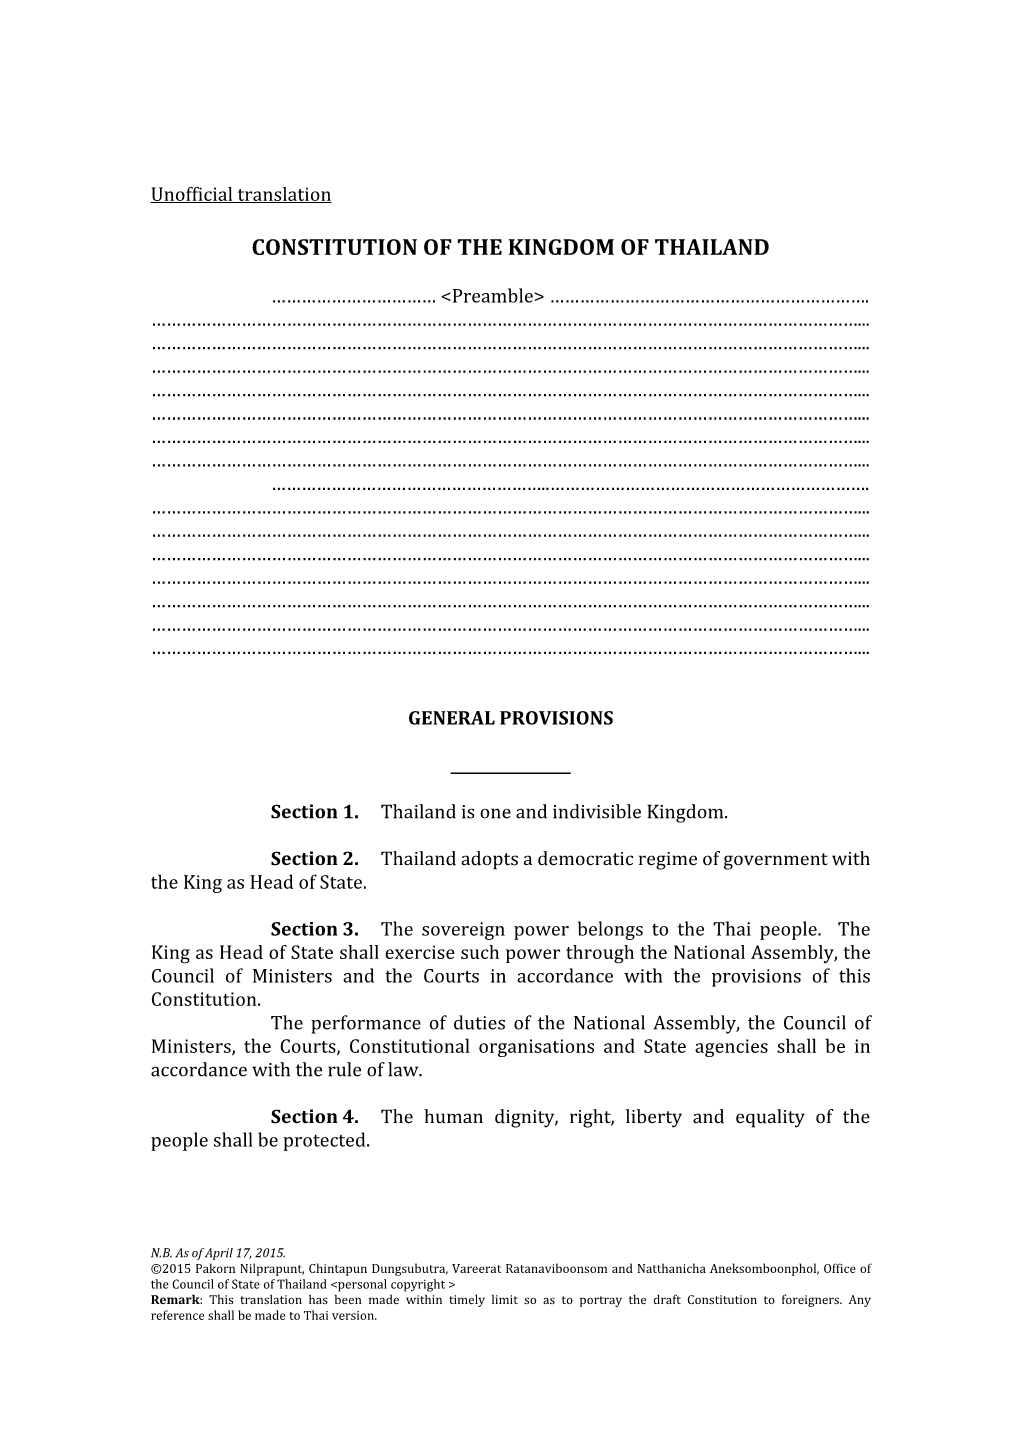 Constitution of the Kingdom of Thailand